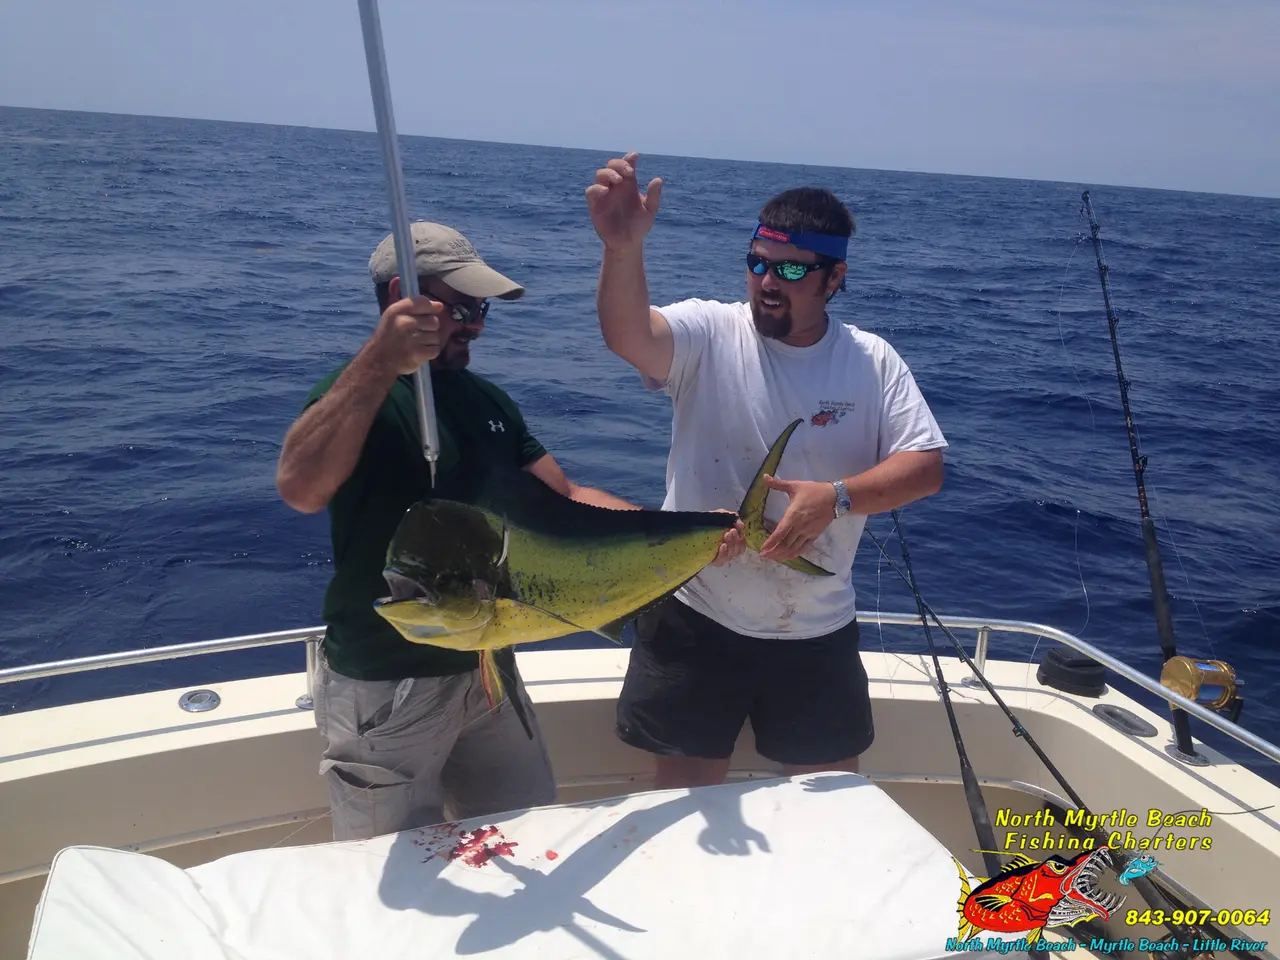 5 Reasons Myrtle Beach Fishing Charters Should Be on Your Family's